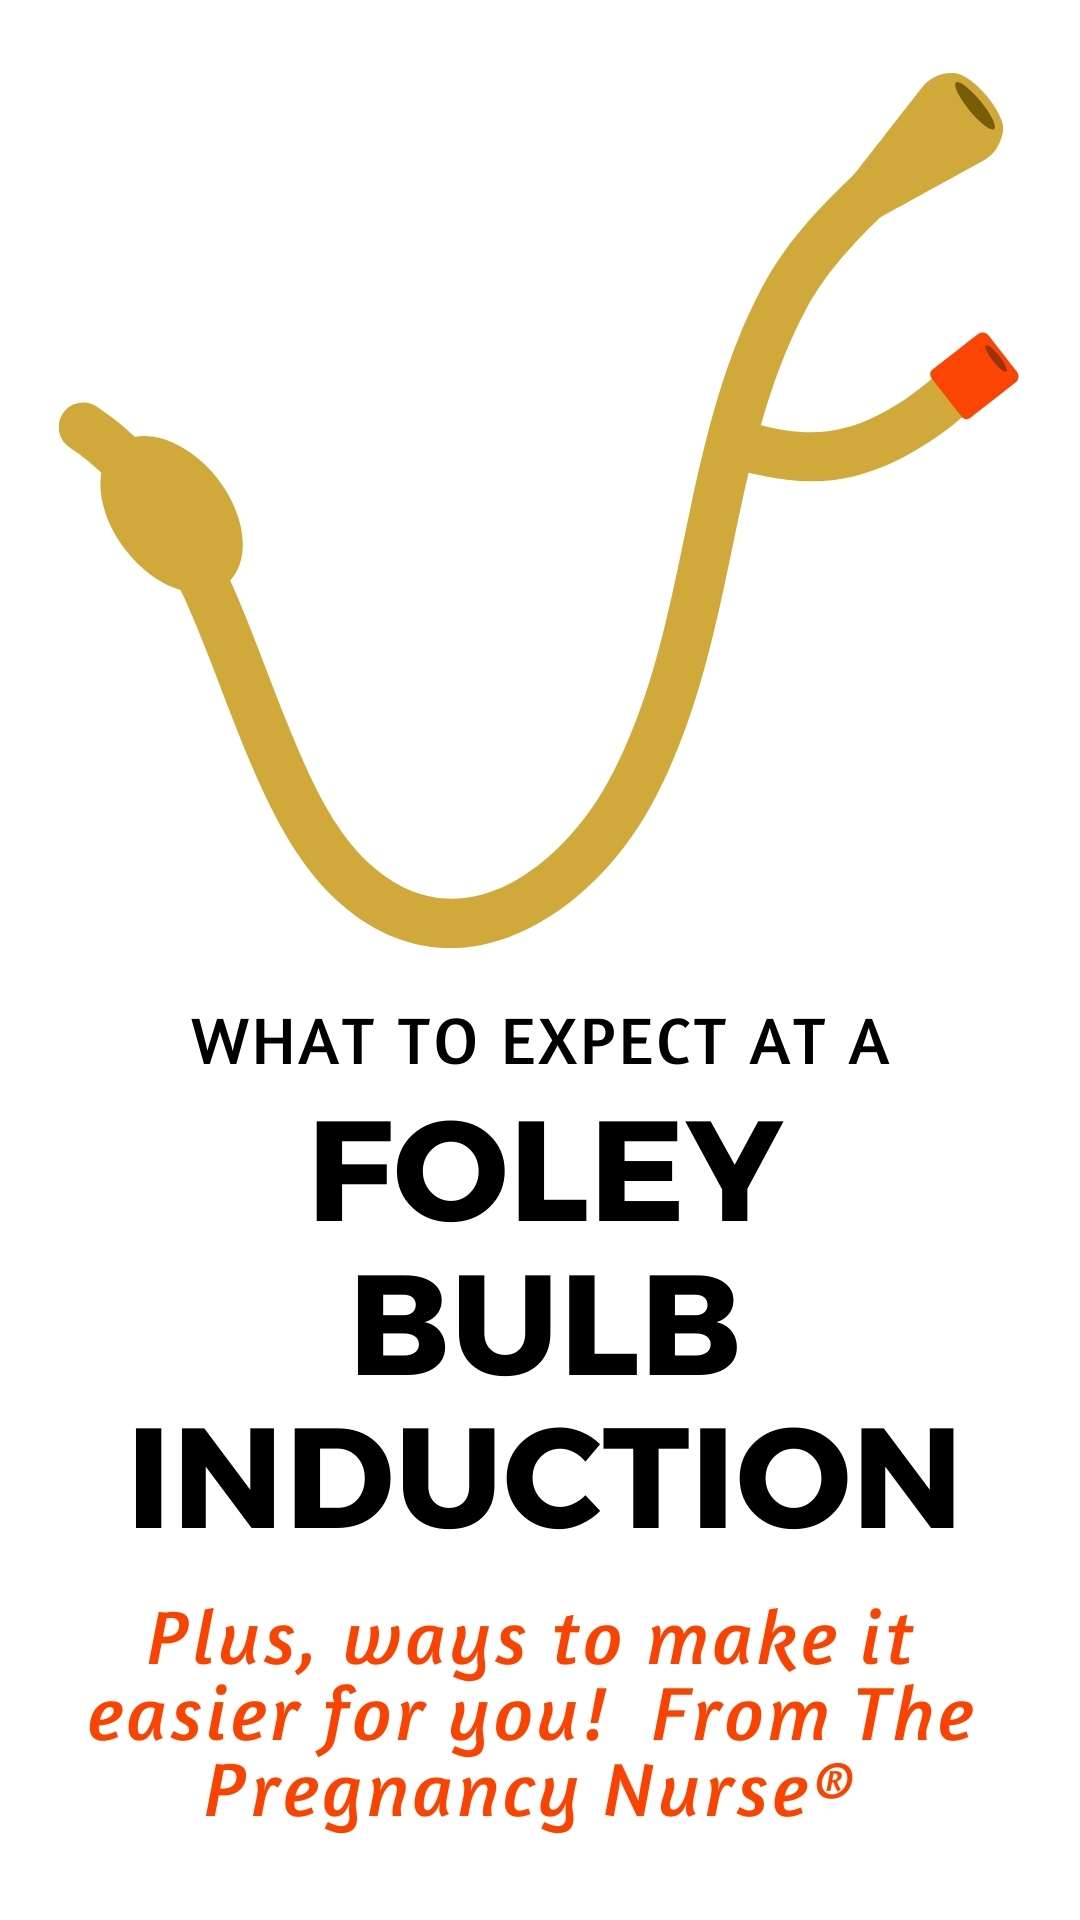 How painful is a Foley bulb induction? You'd be surprised that it varies GREATLY from person to person, and largely depends on your provider’s skill and your own body's response. Dive into this in-depth discussion of Foley Bulb induction’s pain factor - a hot topic that divides opinions!